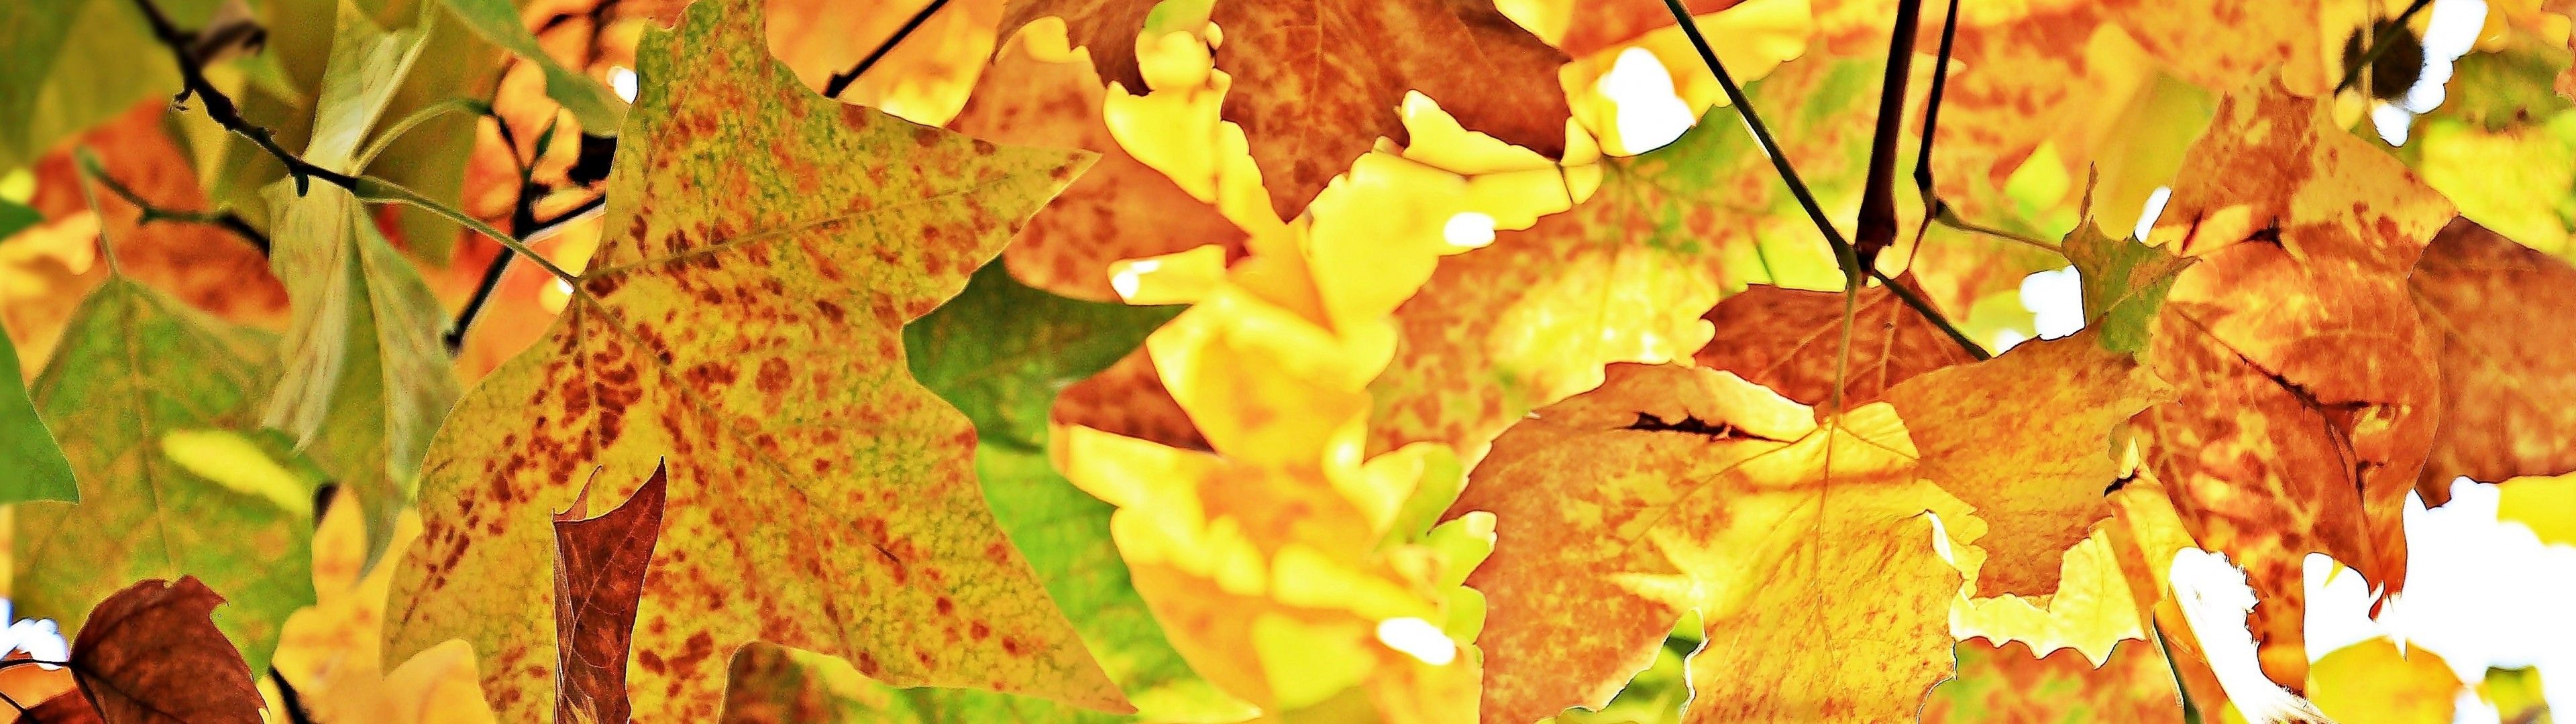 Download 3840x1080 Fall, Leaves, Close Up Wallpaper